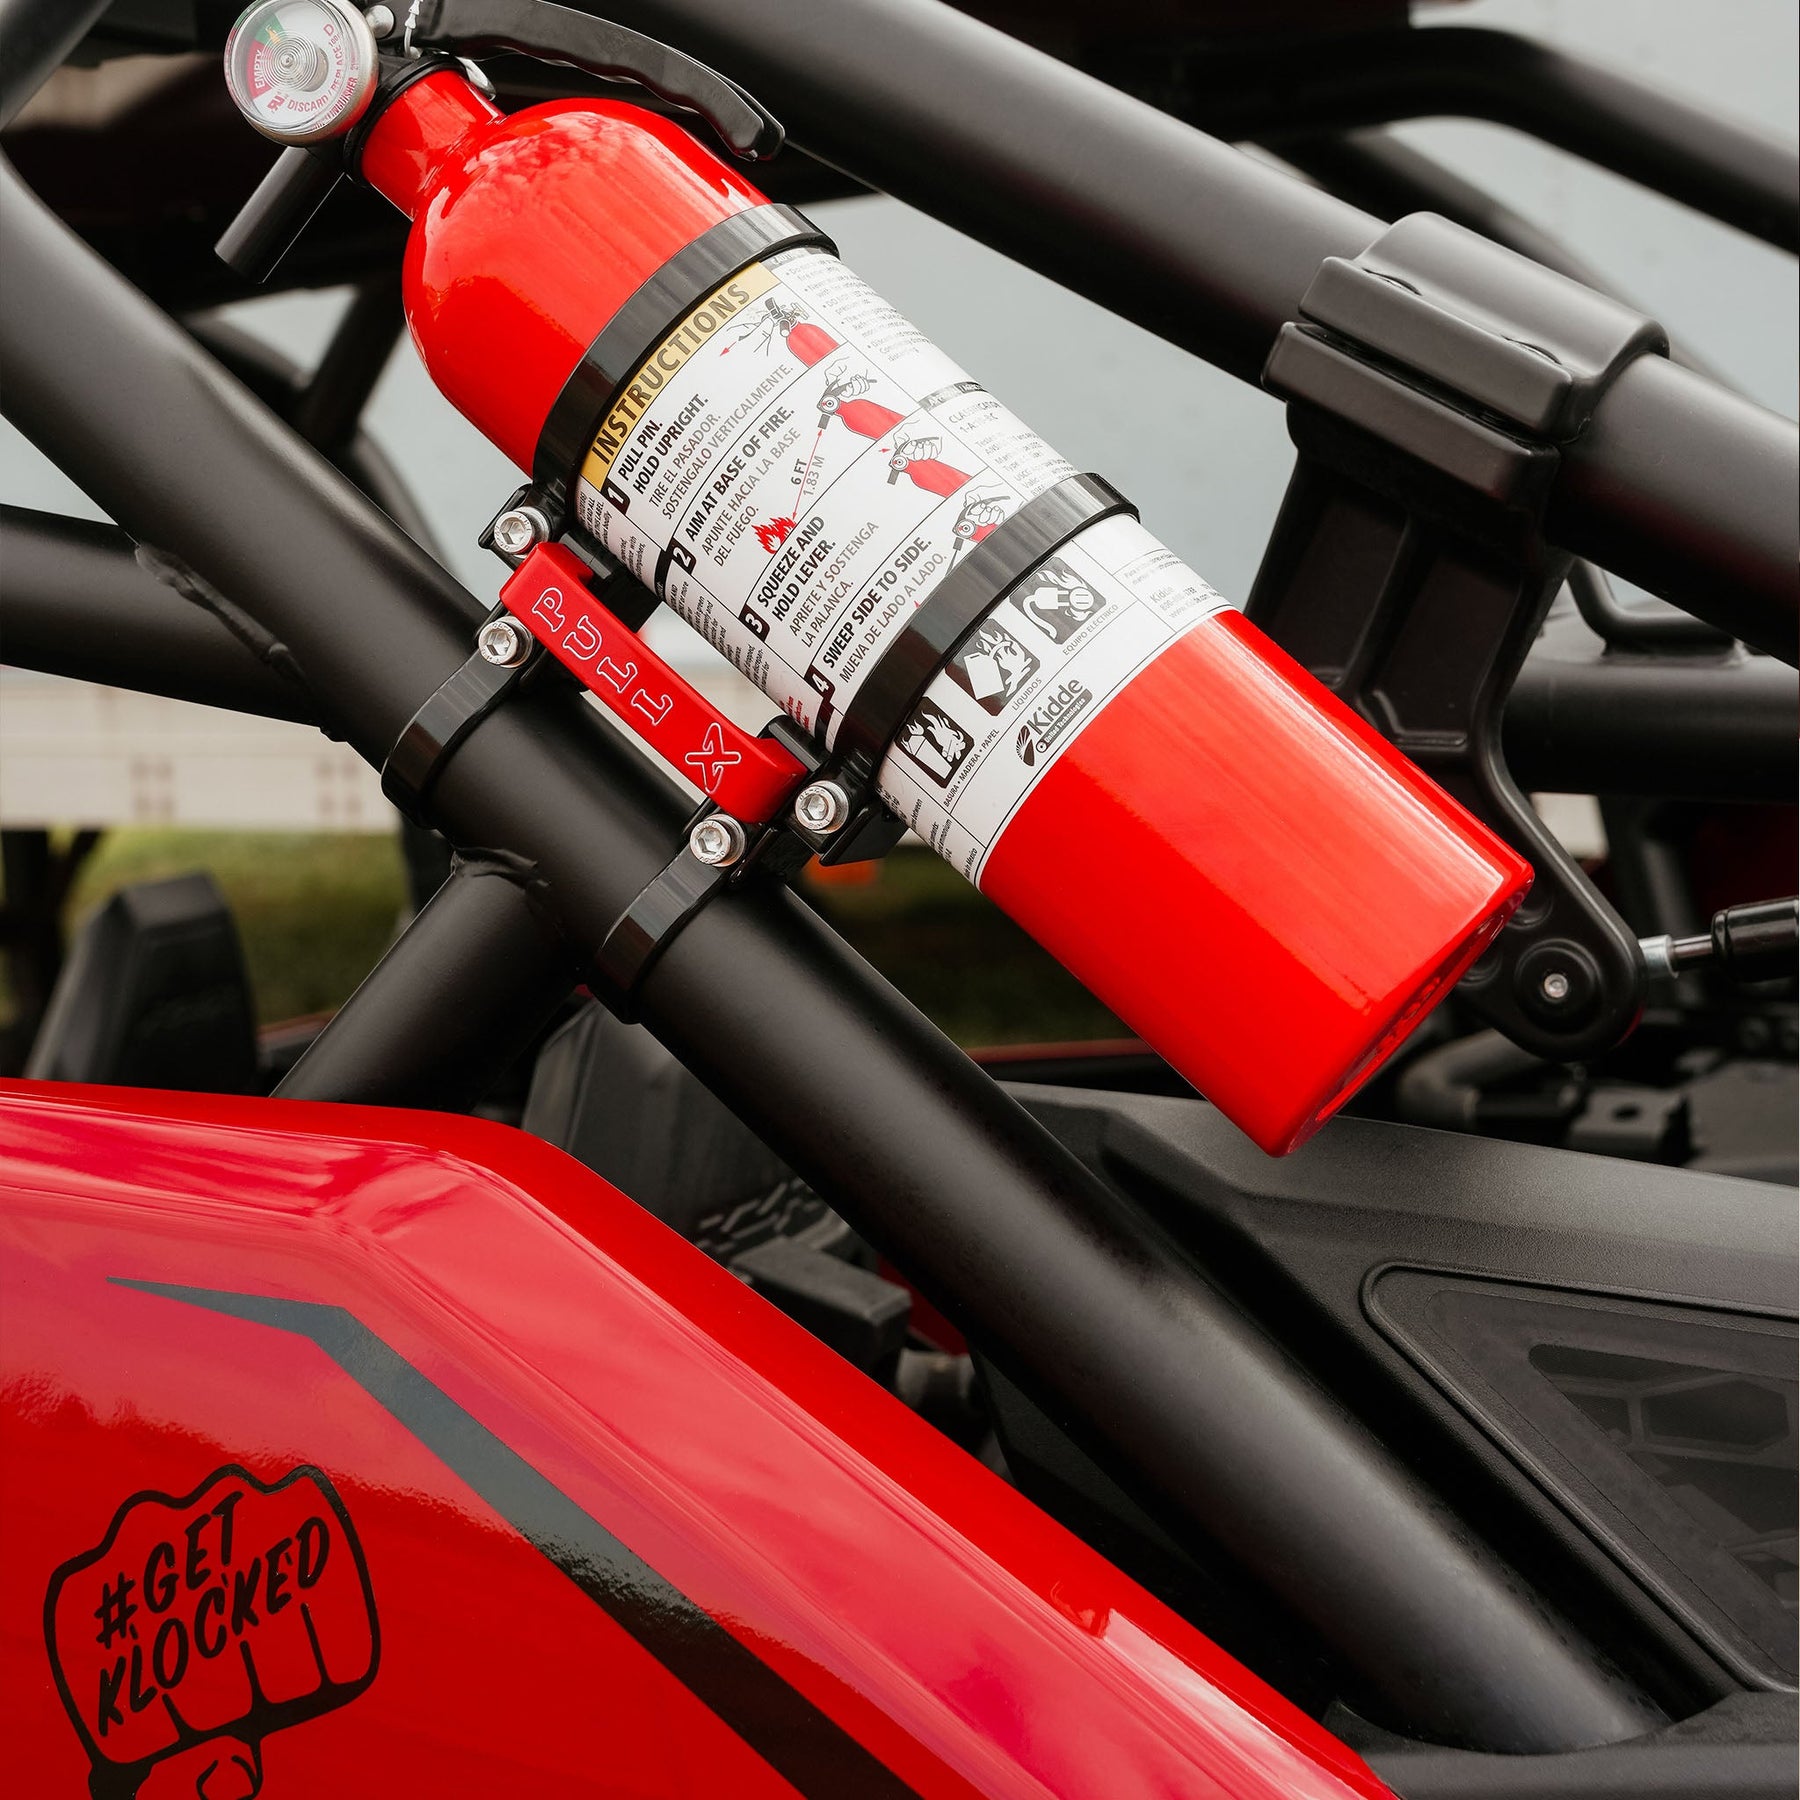 Quick-Release Fire Extinguisher Mount